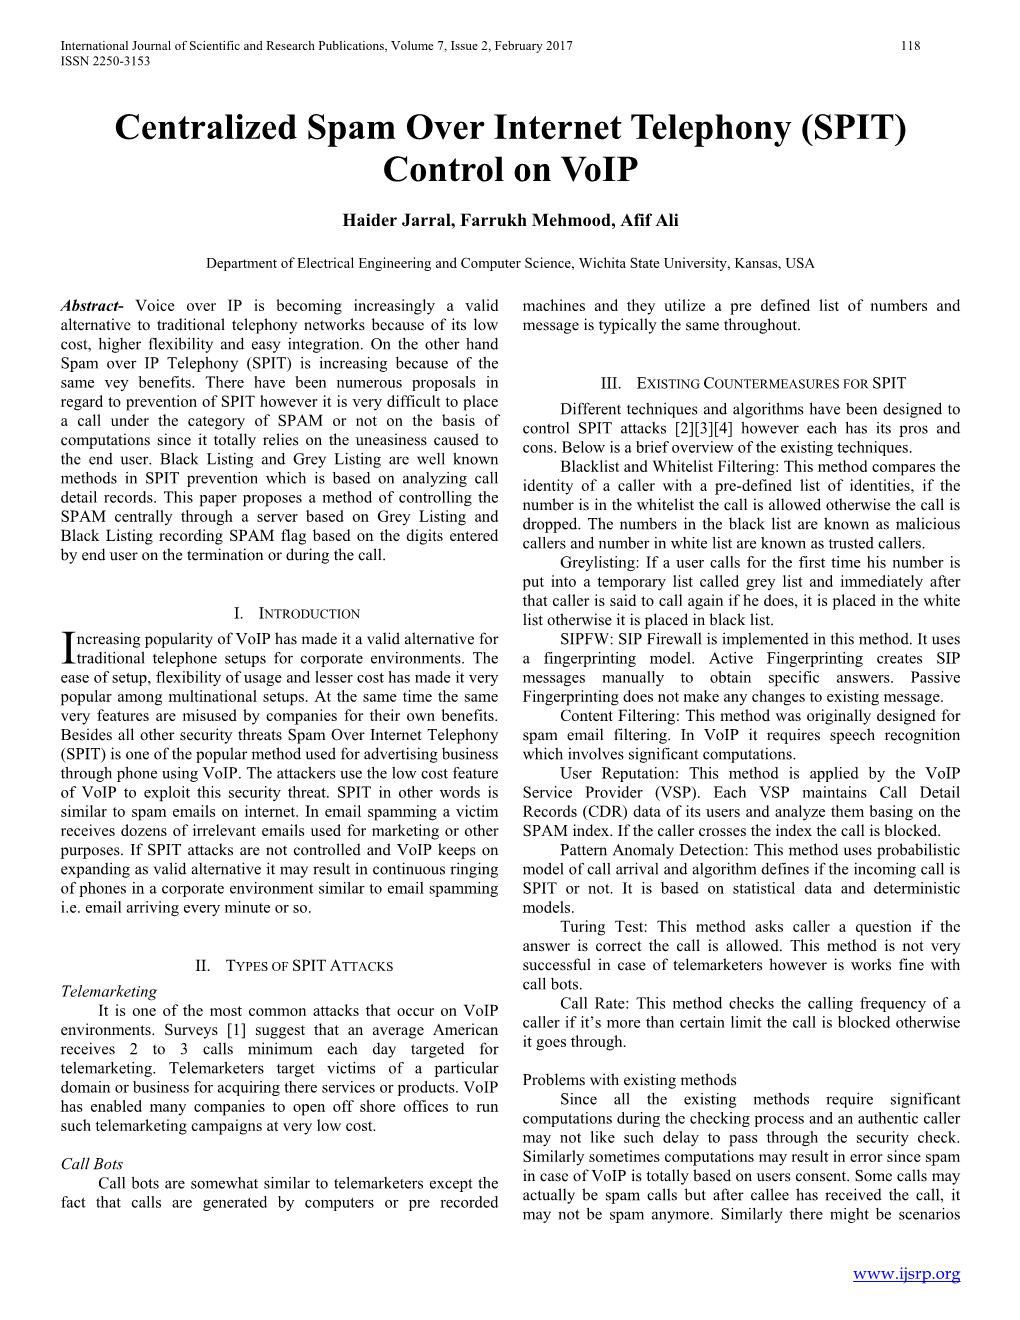 Centralized Spam Over Internet Telephony (SPIT) Control on Voip